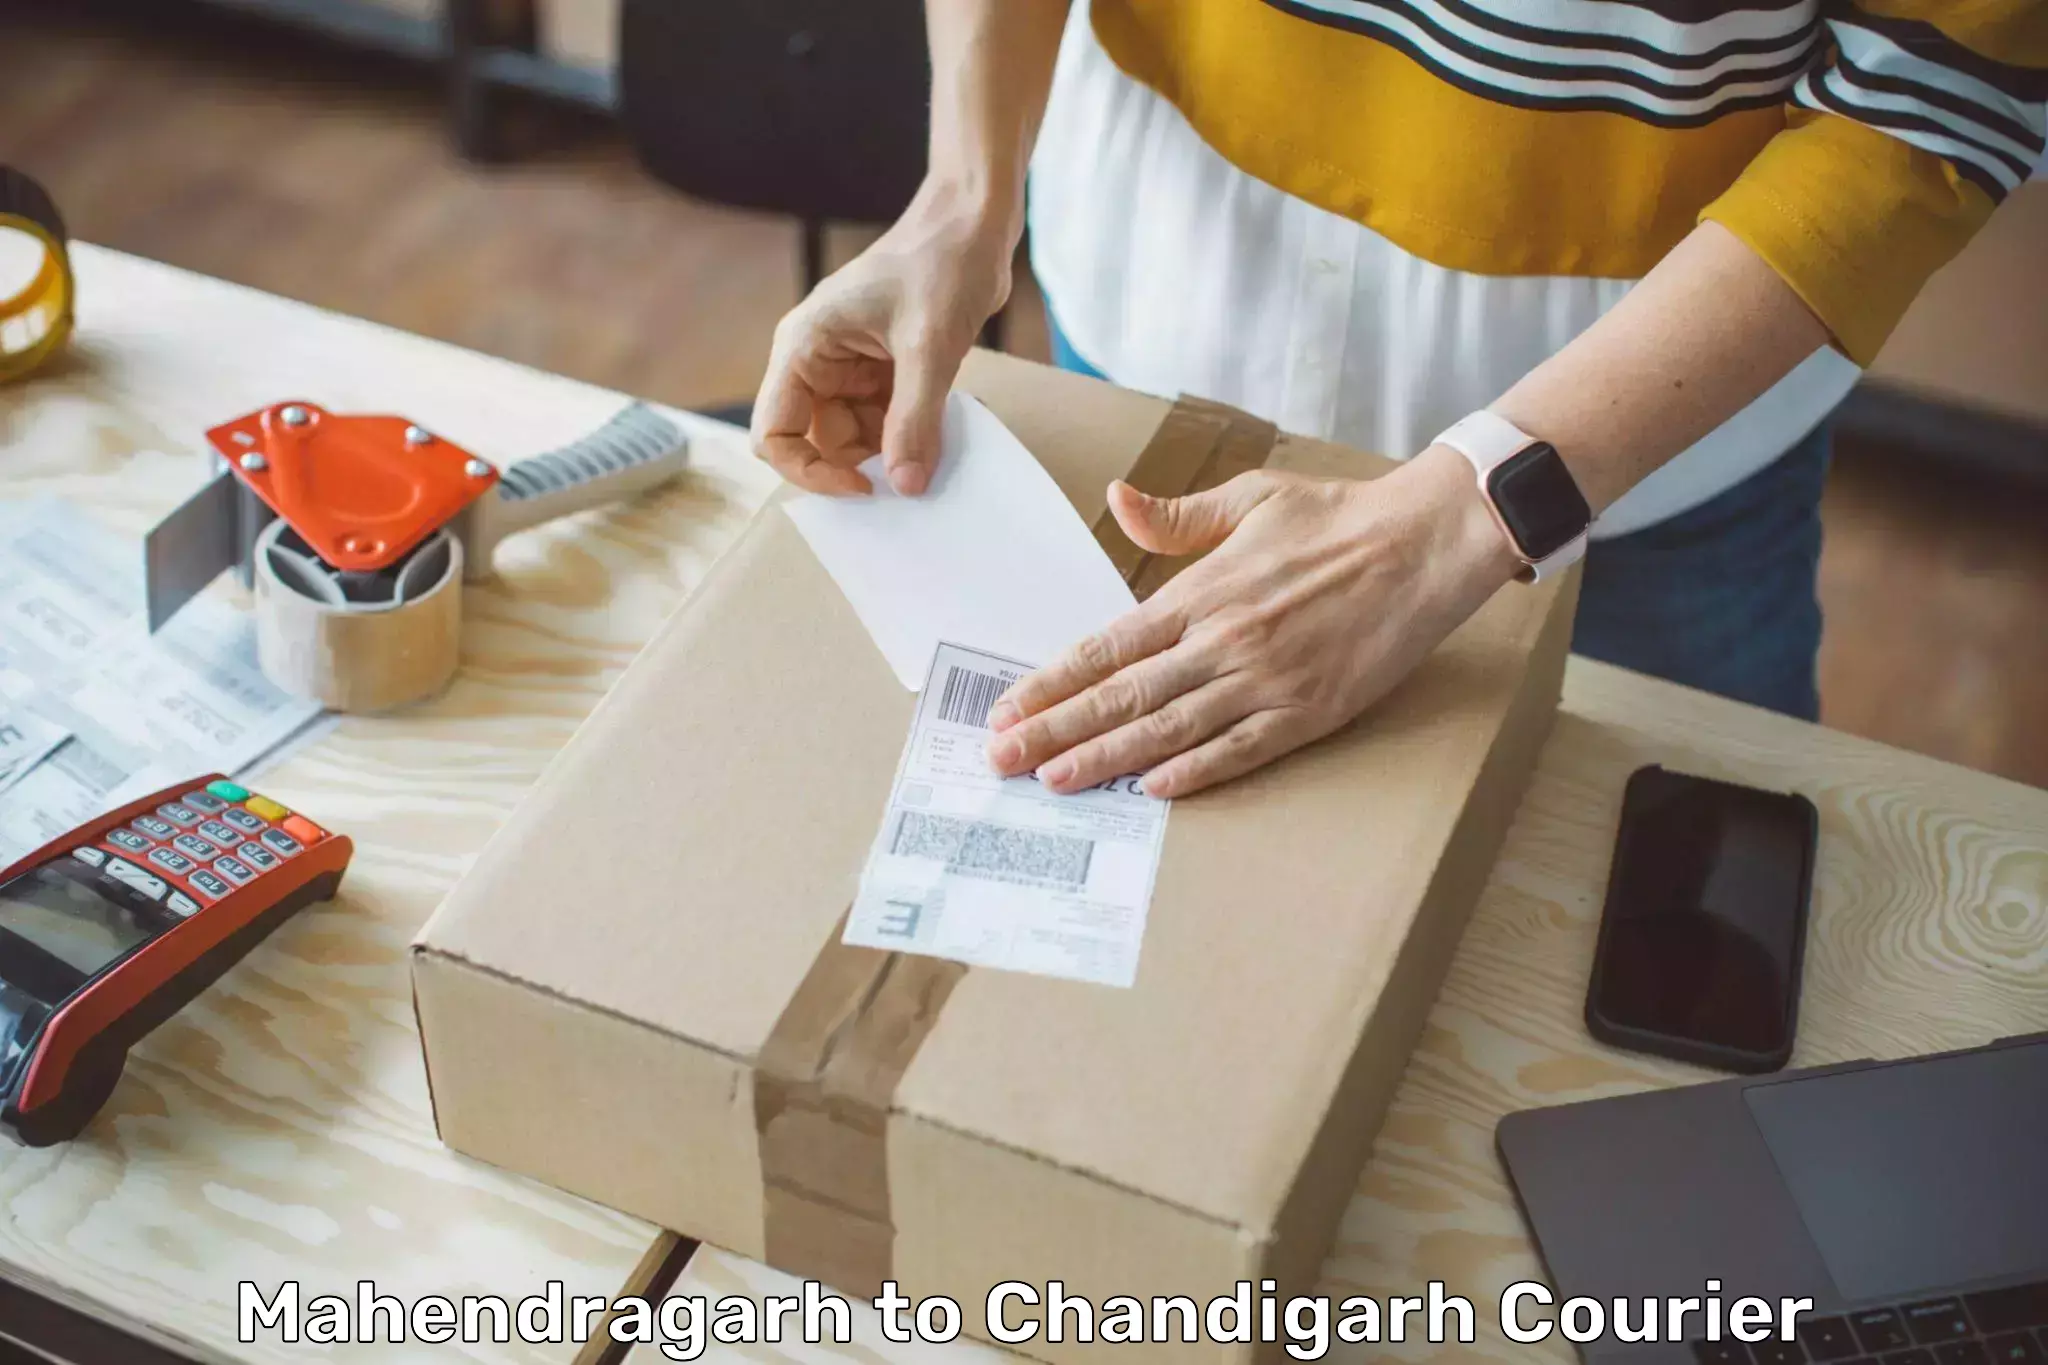 Customizable delivery plans Mahendragarh to Chandigarh